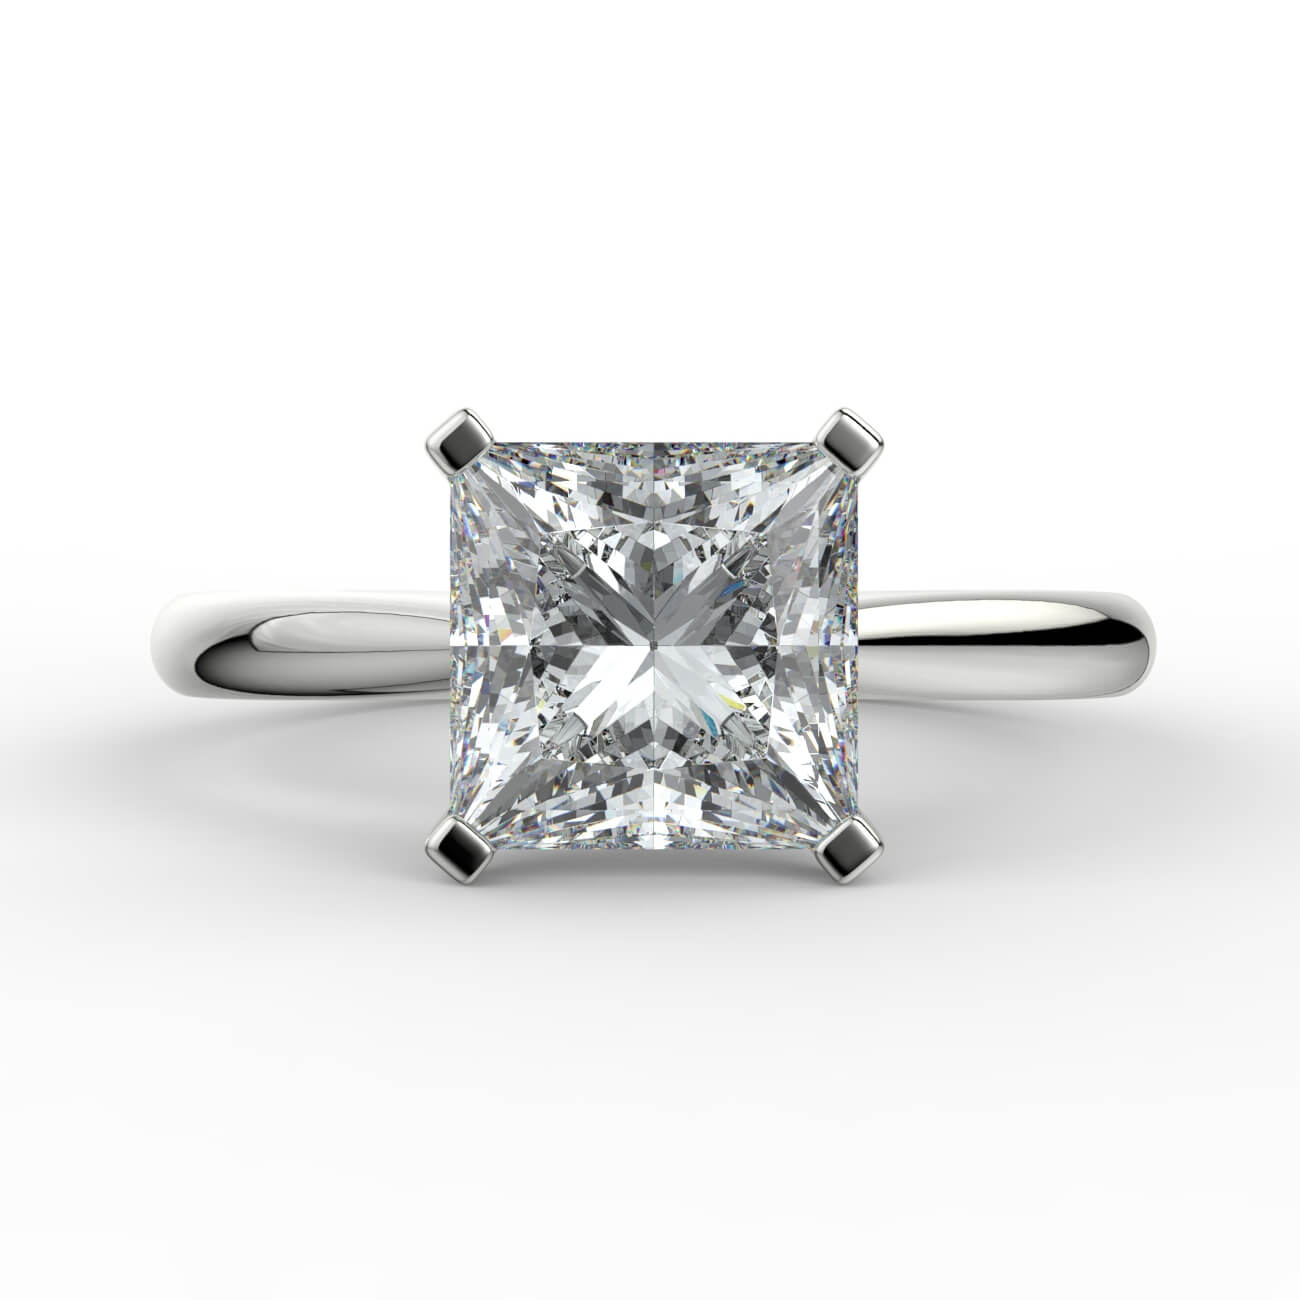 Princess cut diamond cathedral engagement ring in white gold – Australian Diamond Network